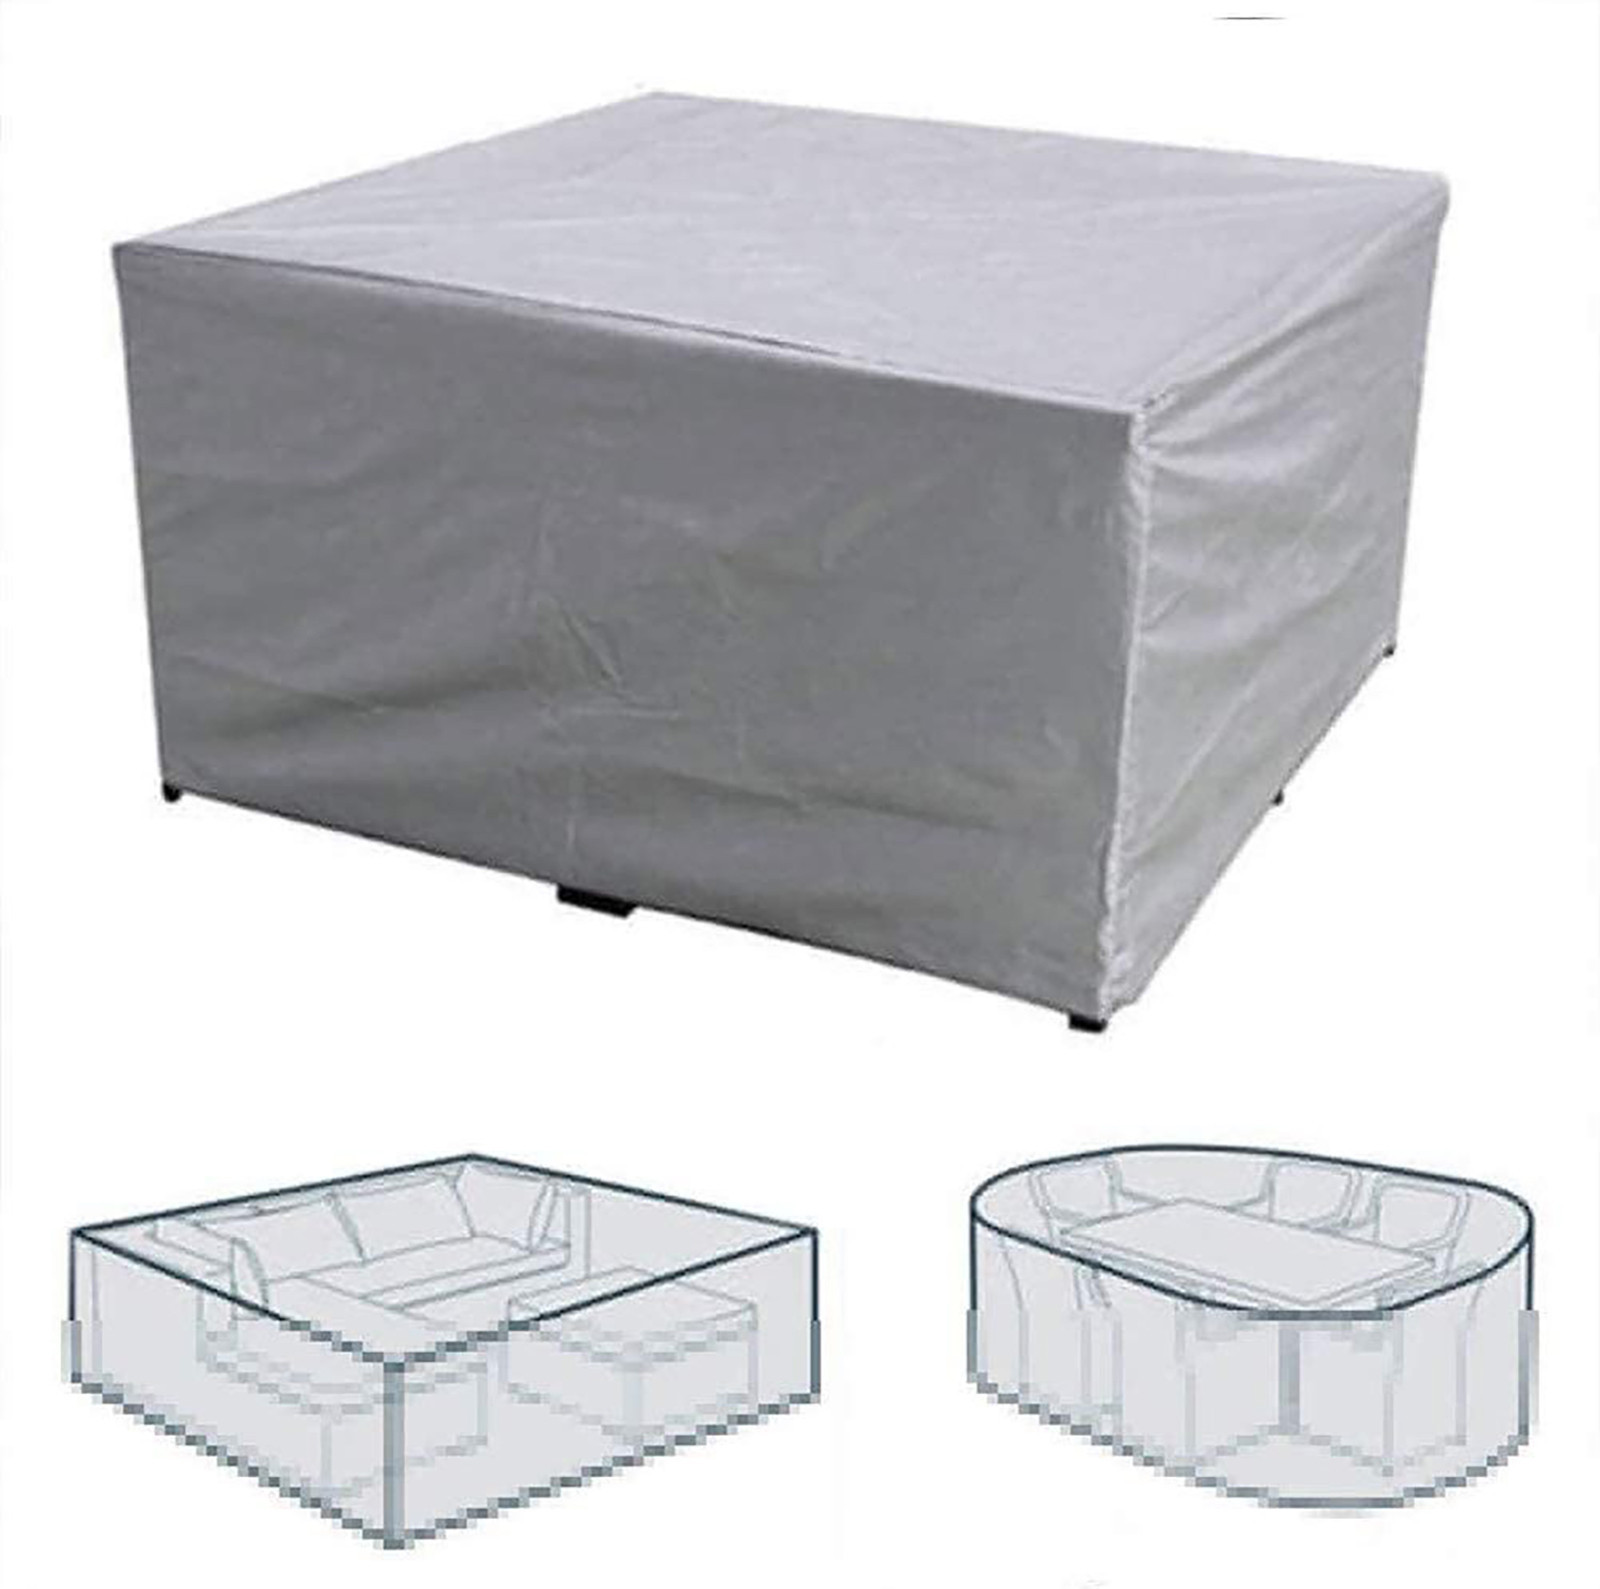 Garden Furniture Covers Waterproof Outdoor Patio Winter Storage Rain Snow Chair Covers Sofa Table Tarpaulin Dust Proof Cover